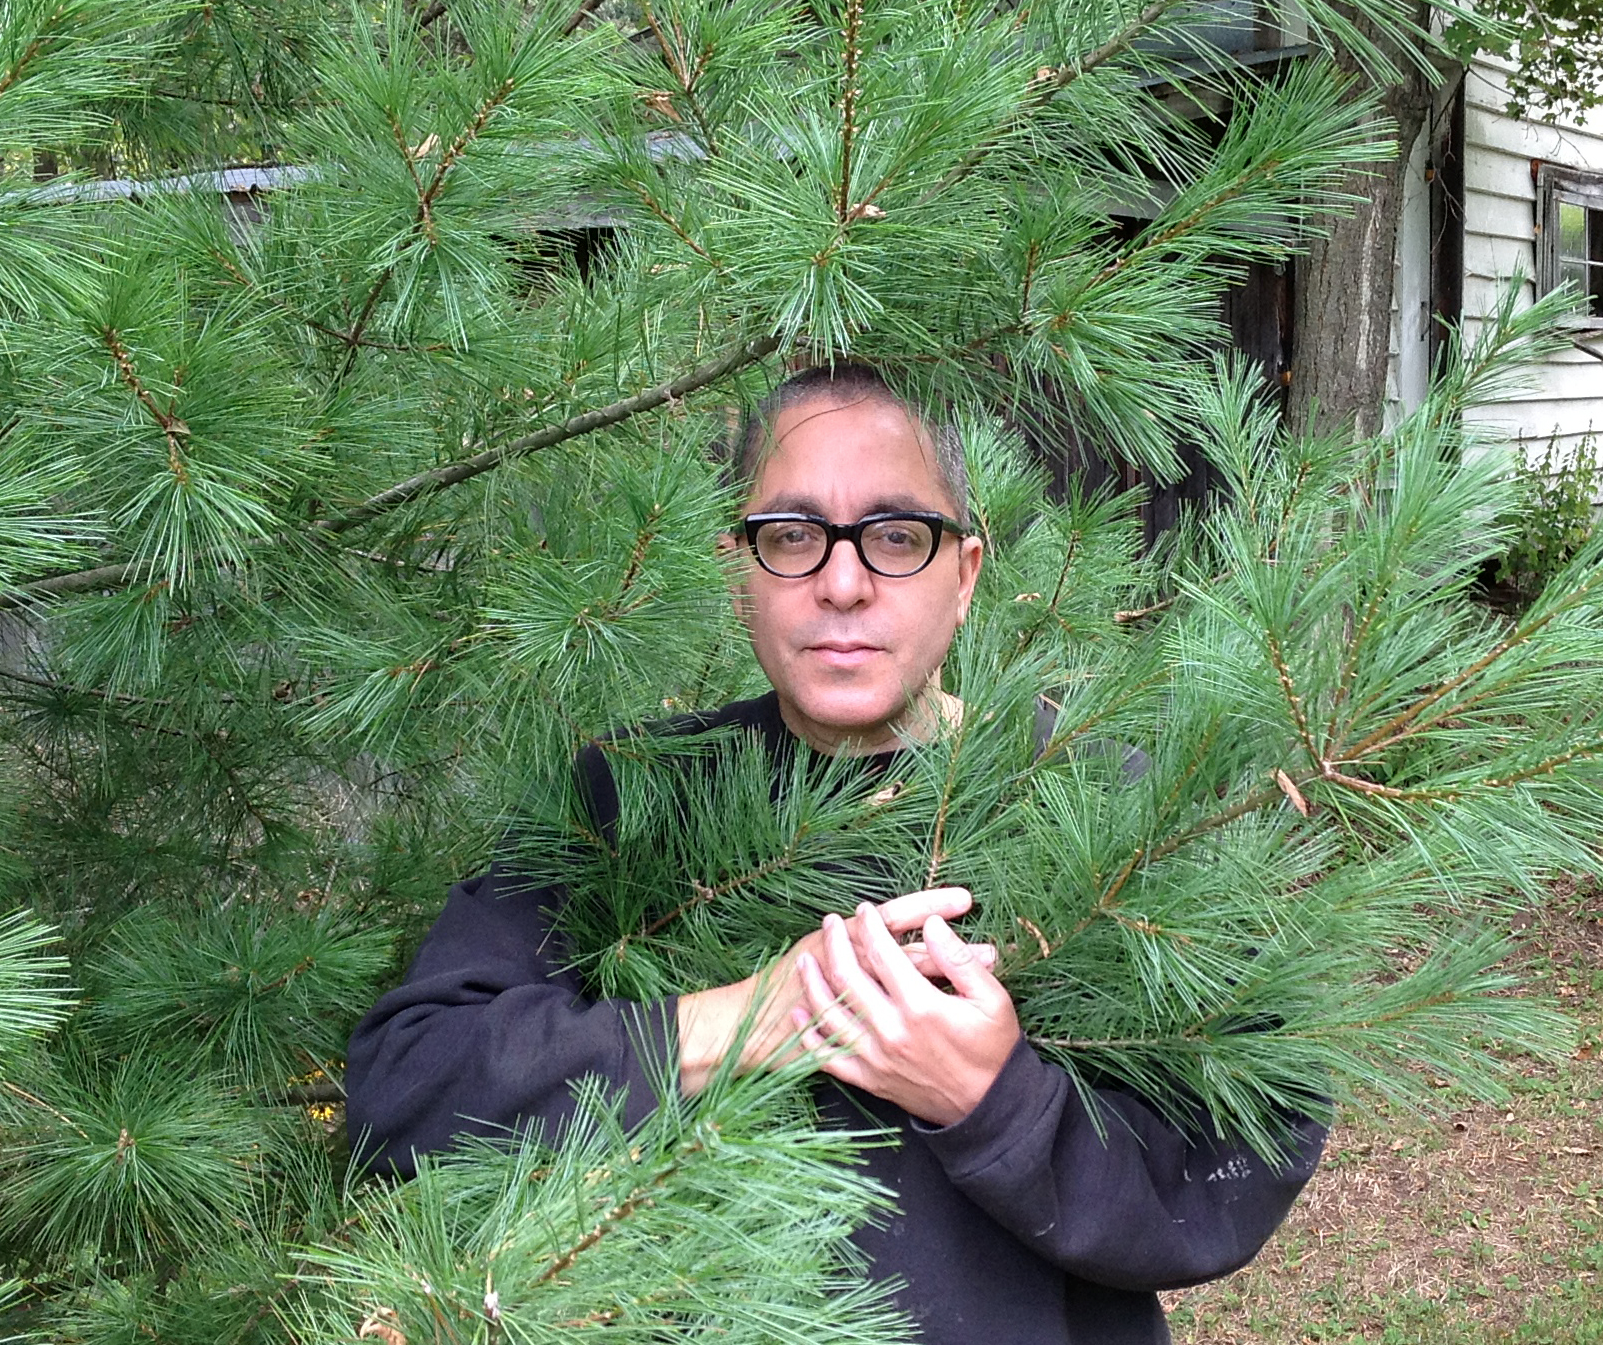 Nicolás peers back at you from behind the branches of a pine tree